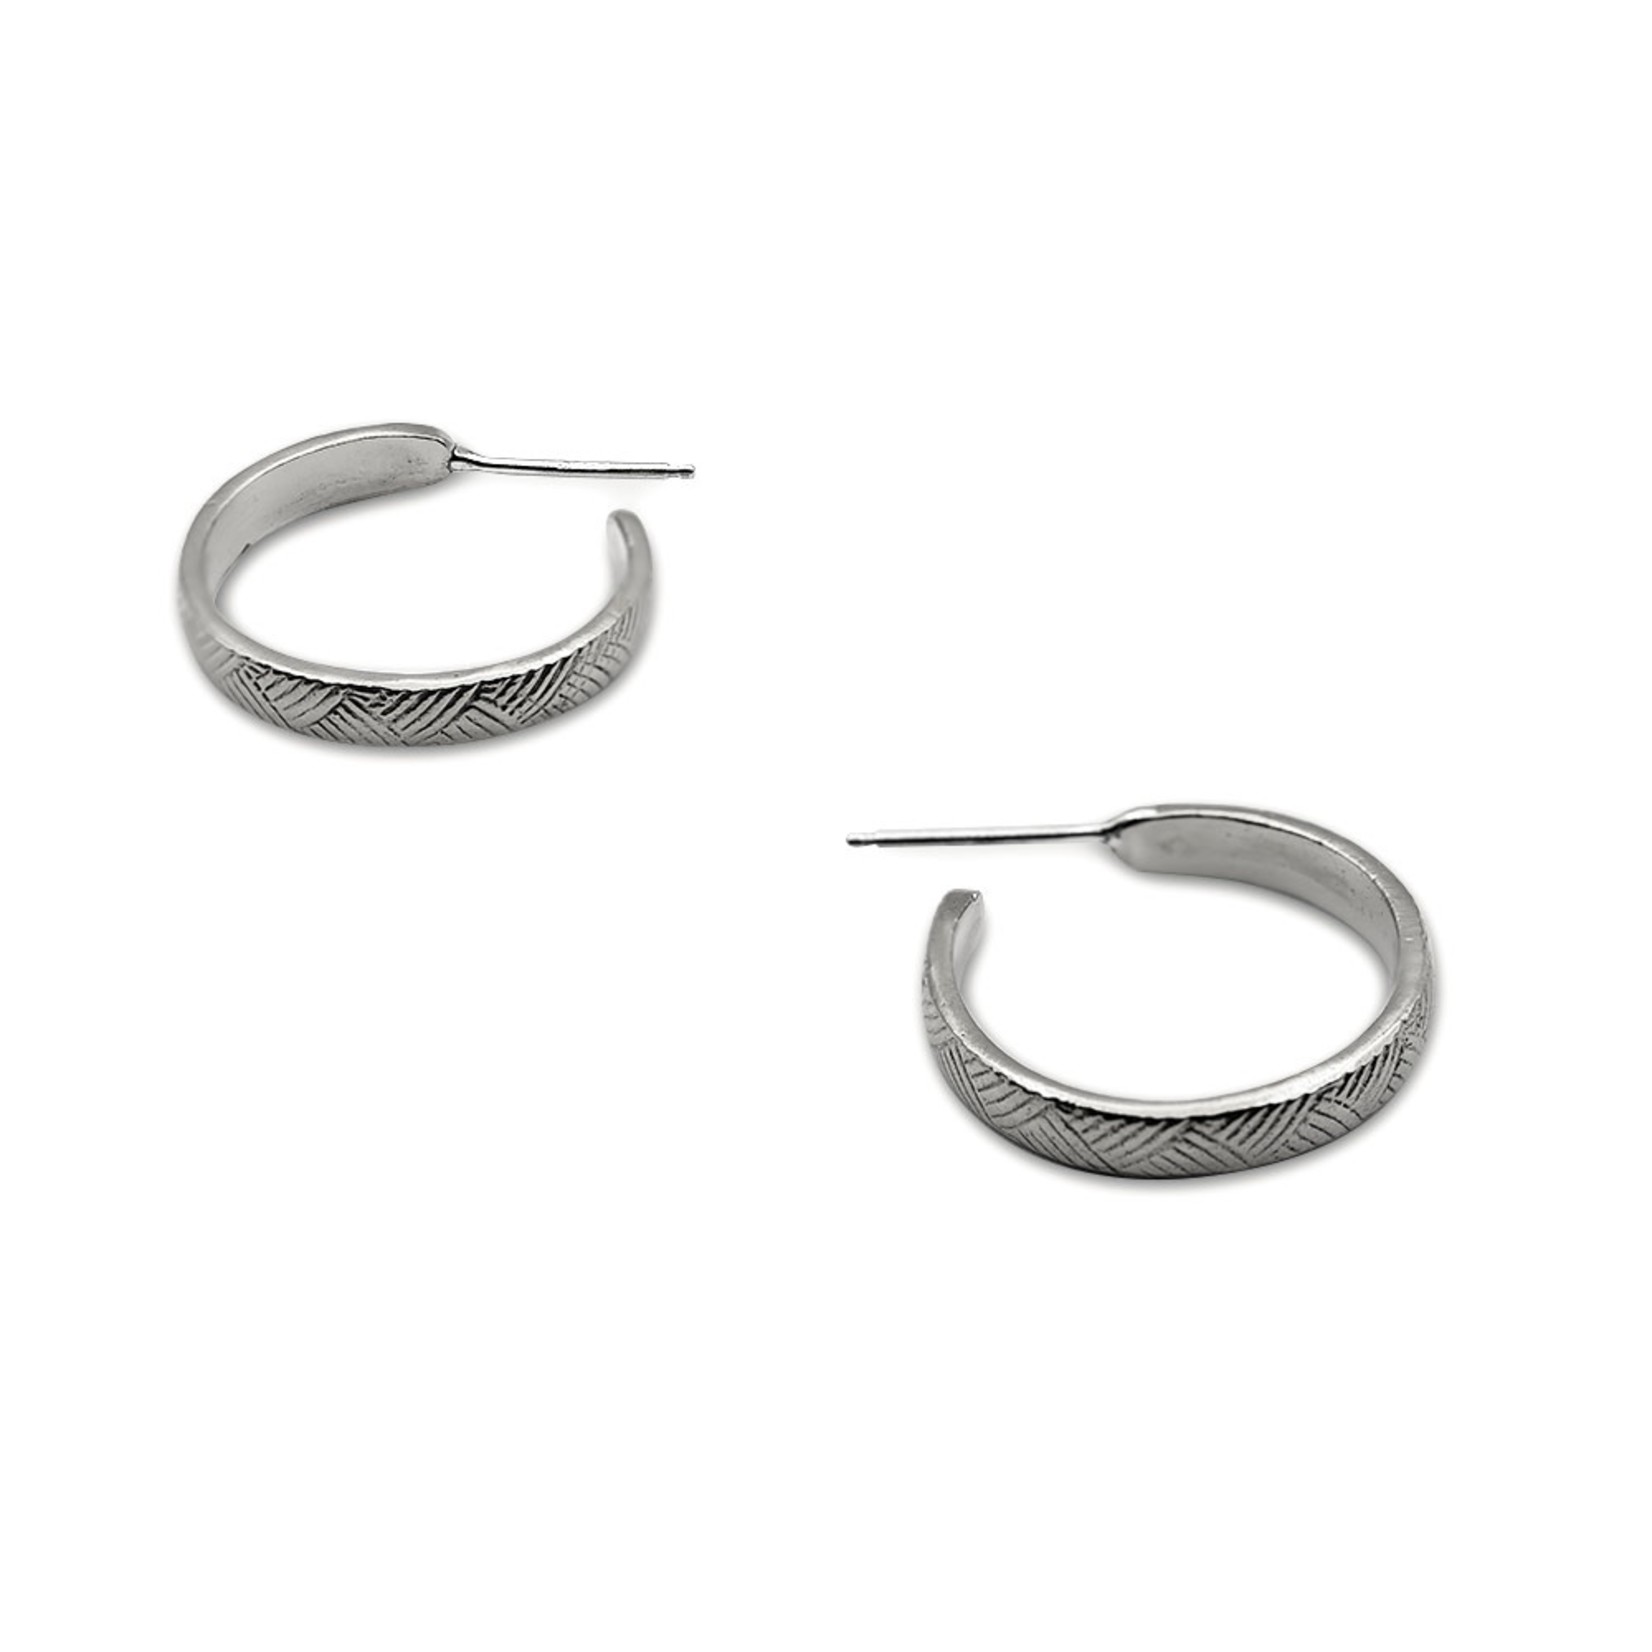 Mana Made Jewelry Mana Made Vintage Lines Hoop Earrings in Silver (S)